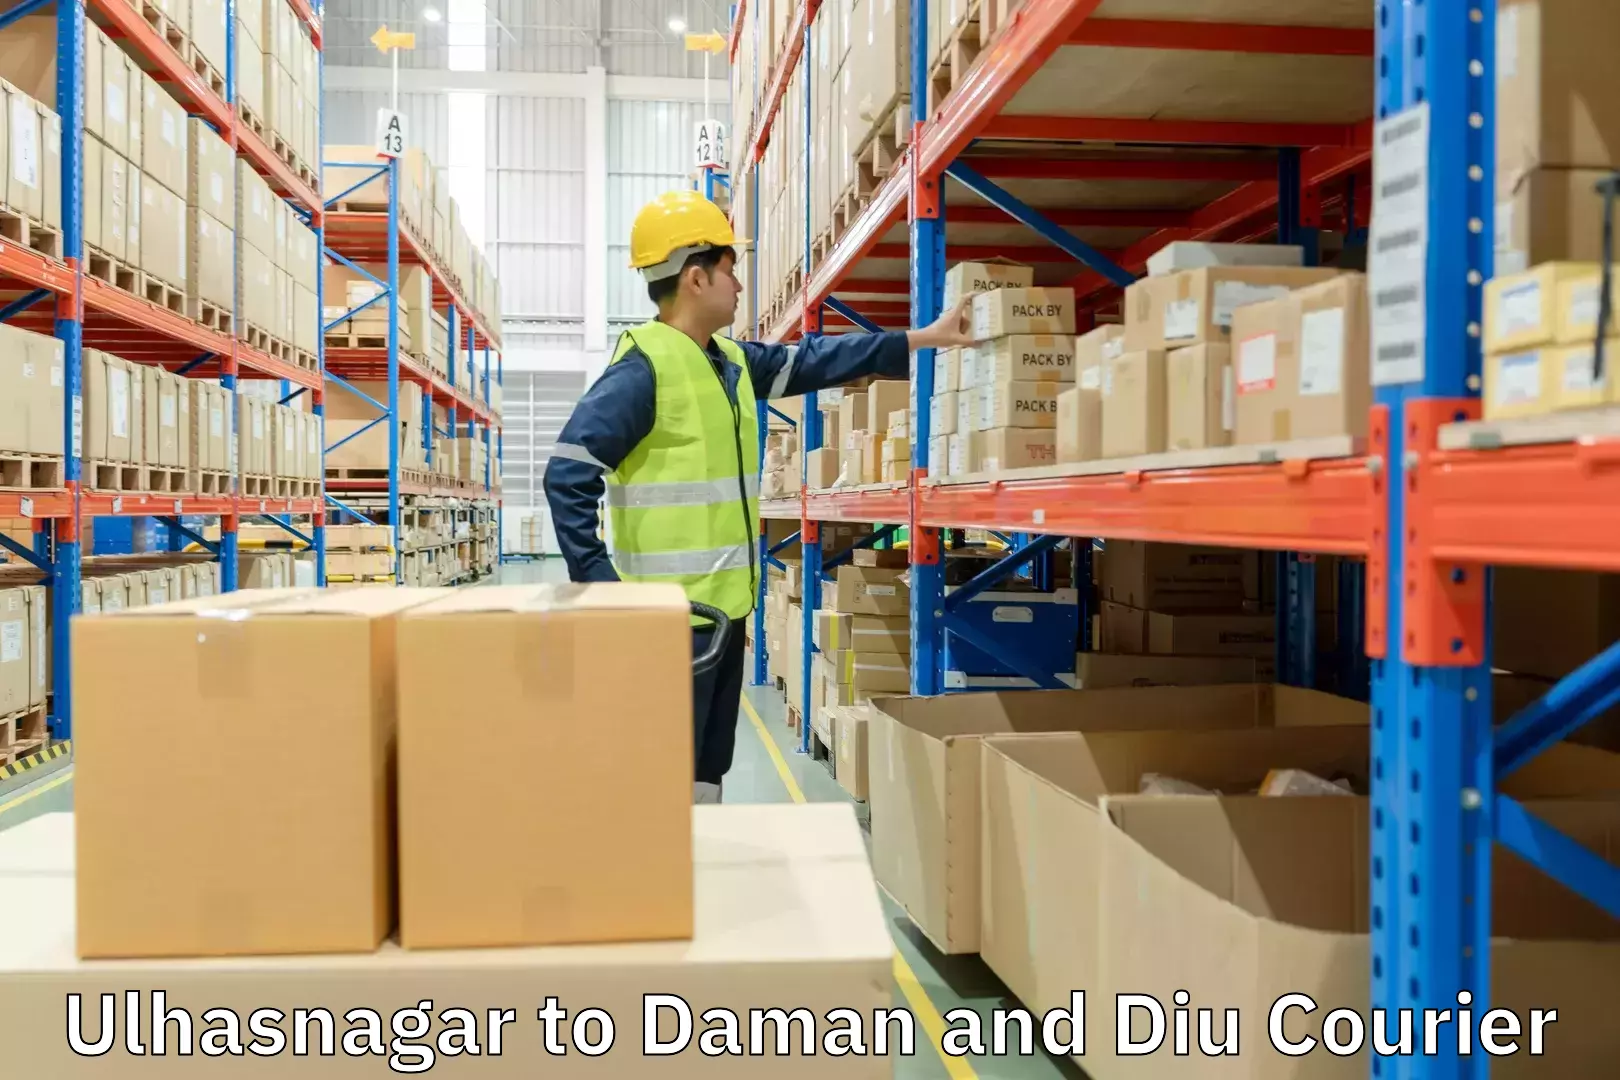 Express delivery network Ulhasnagar to Daman and Diu